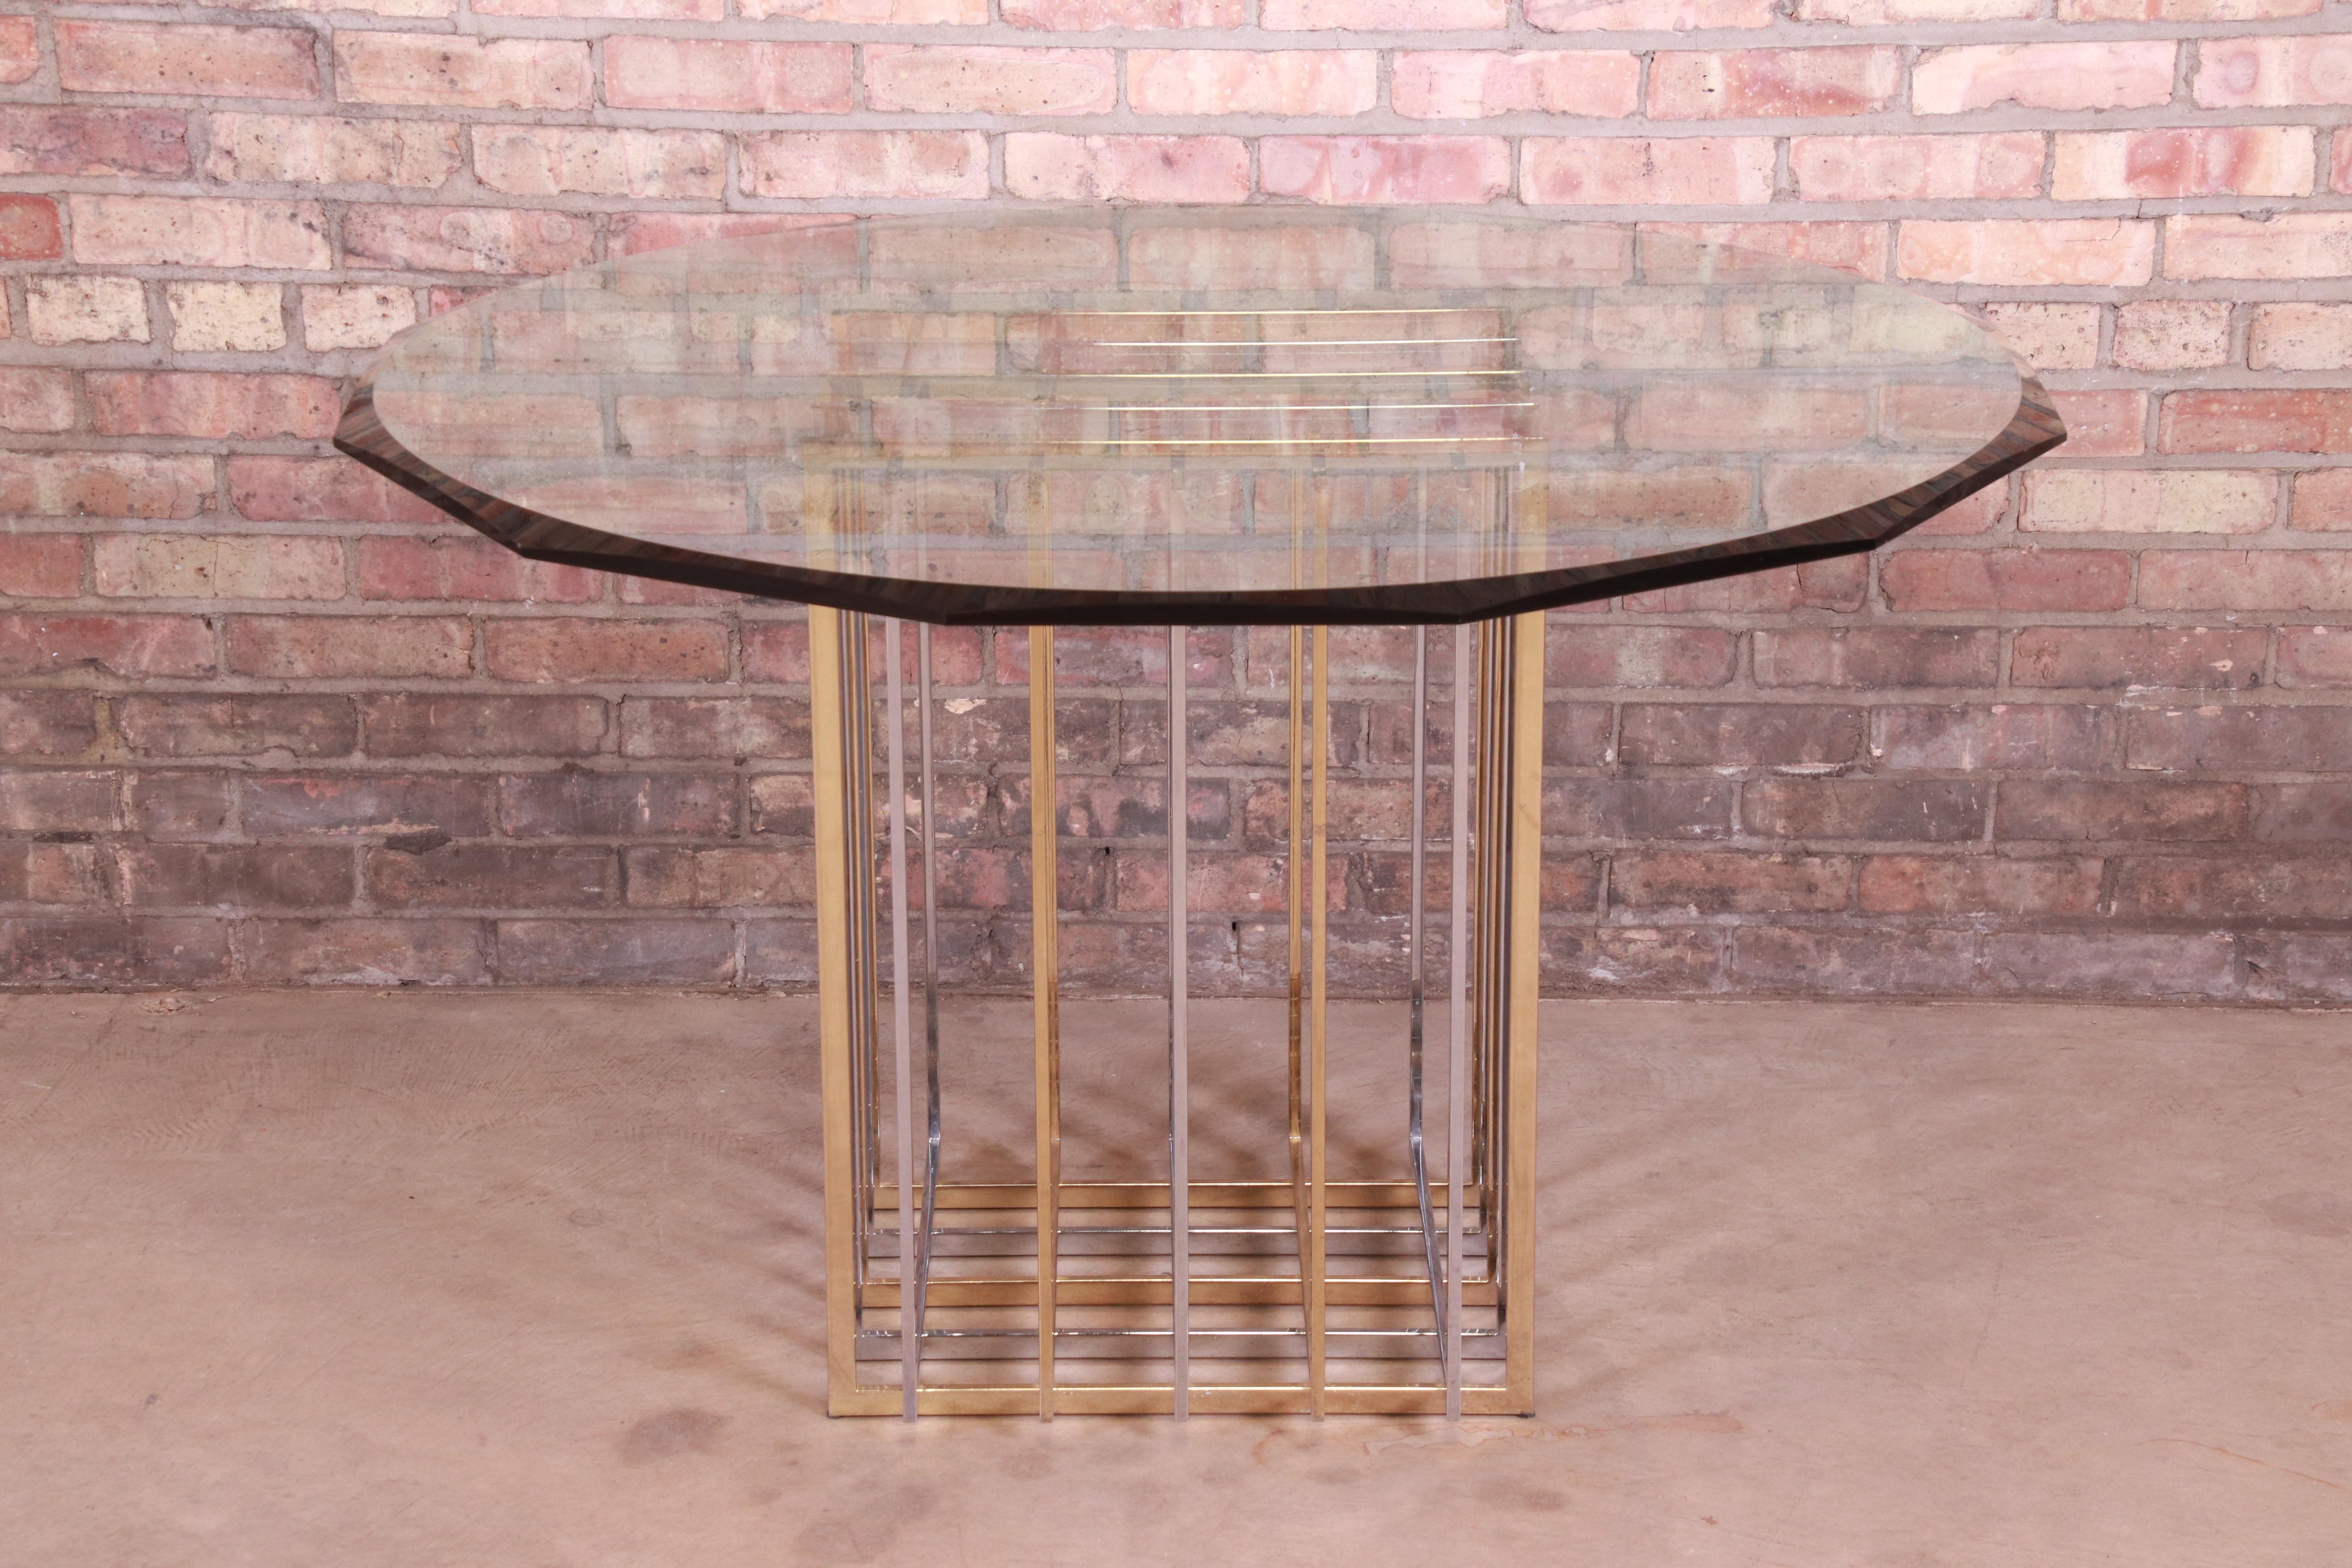 A rare and exceptional Mid-Century Modern Hollywood Regency pedestal dining or game table

By Pierre Cardin

USA, circa 1970s

Base comprised of alternating flat bar squares in nickel and brass. tabletop is a thick beveled glass.

Measures: